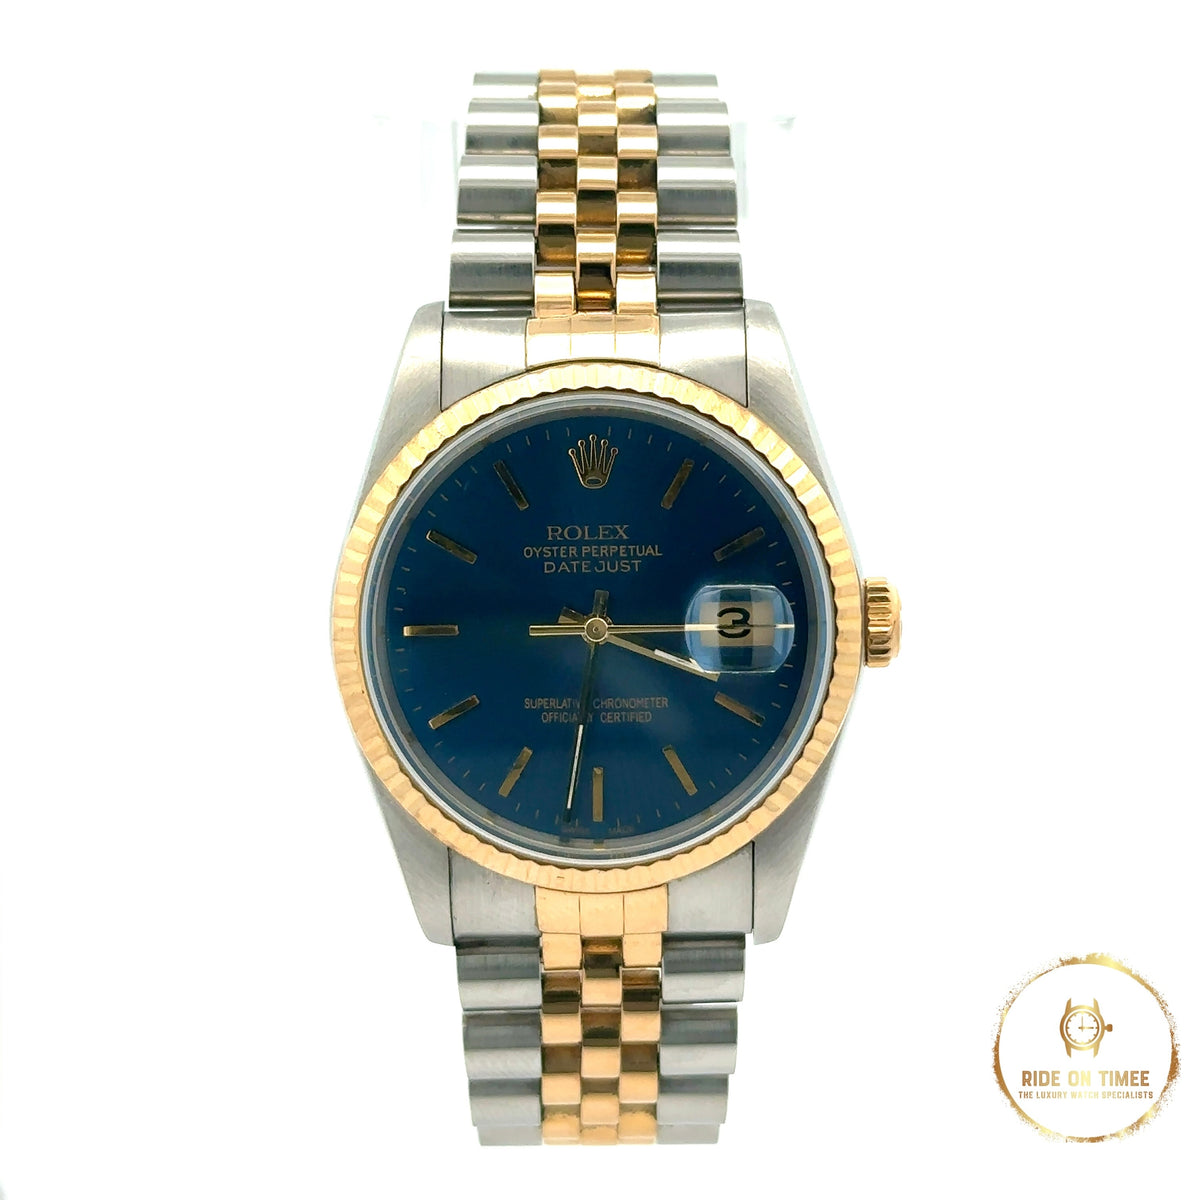 Rolex Datejust 36 Navy Blue Baton Dial ‘16233’ - Ride On Timee